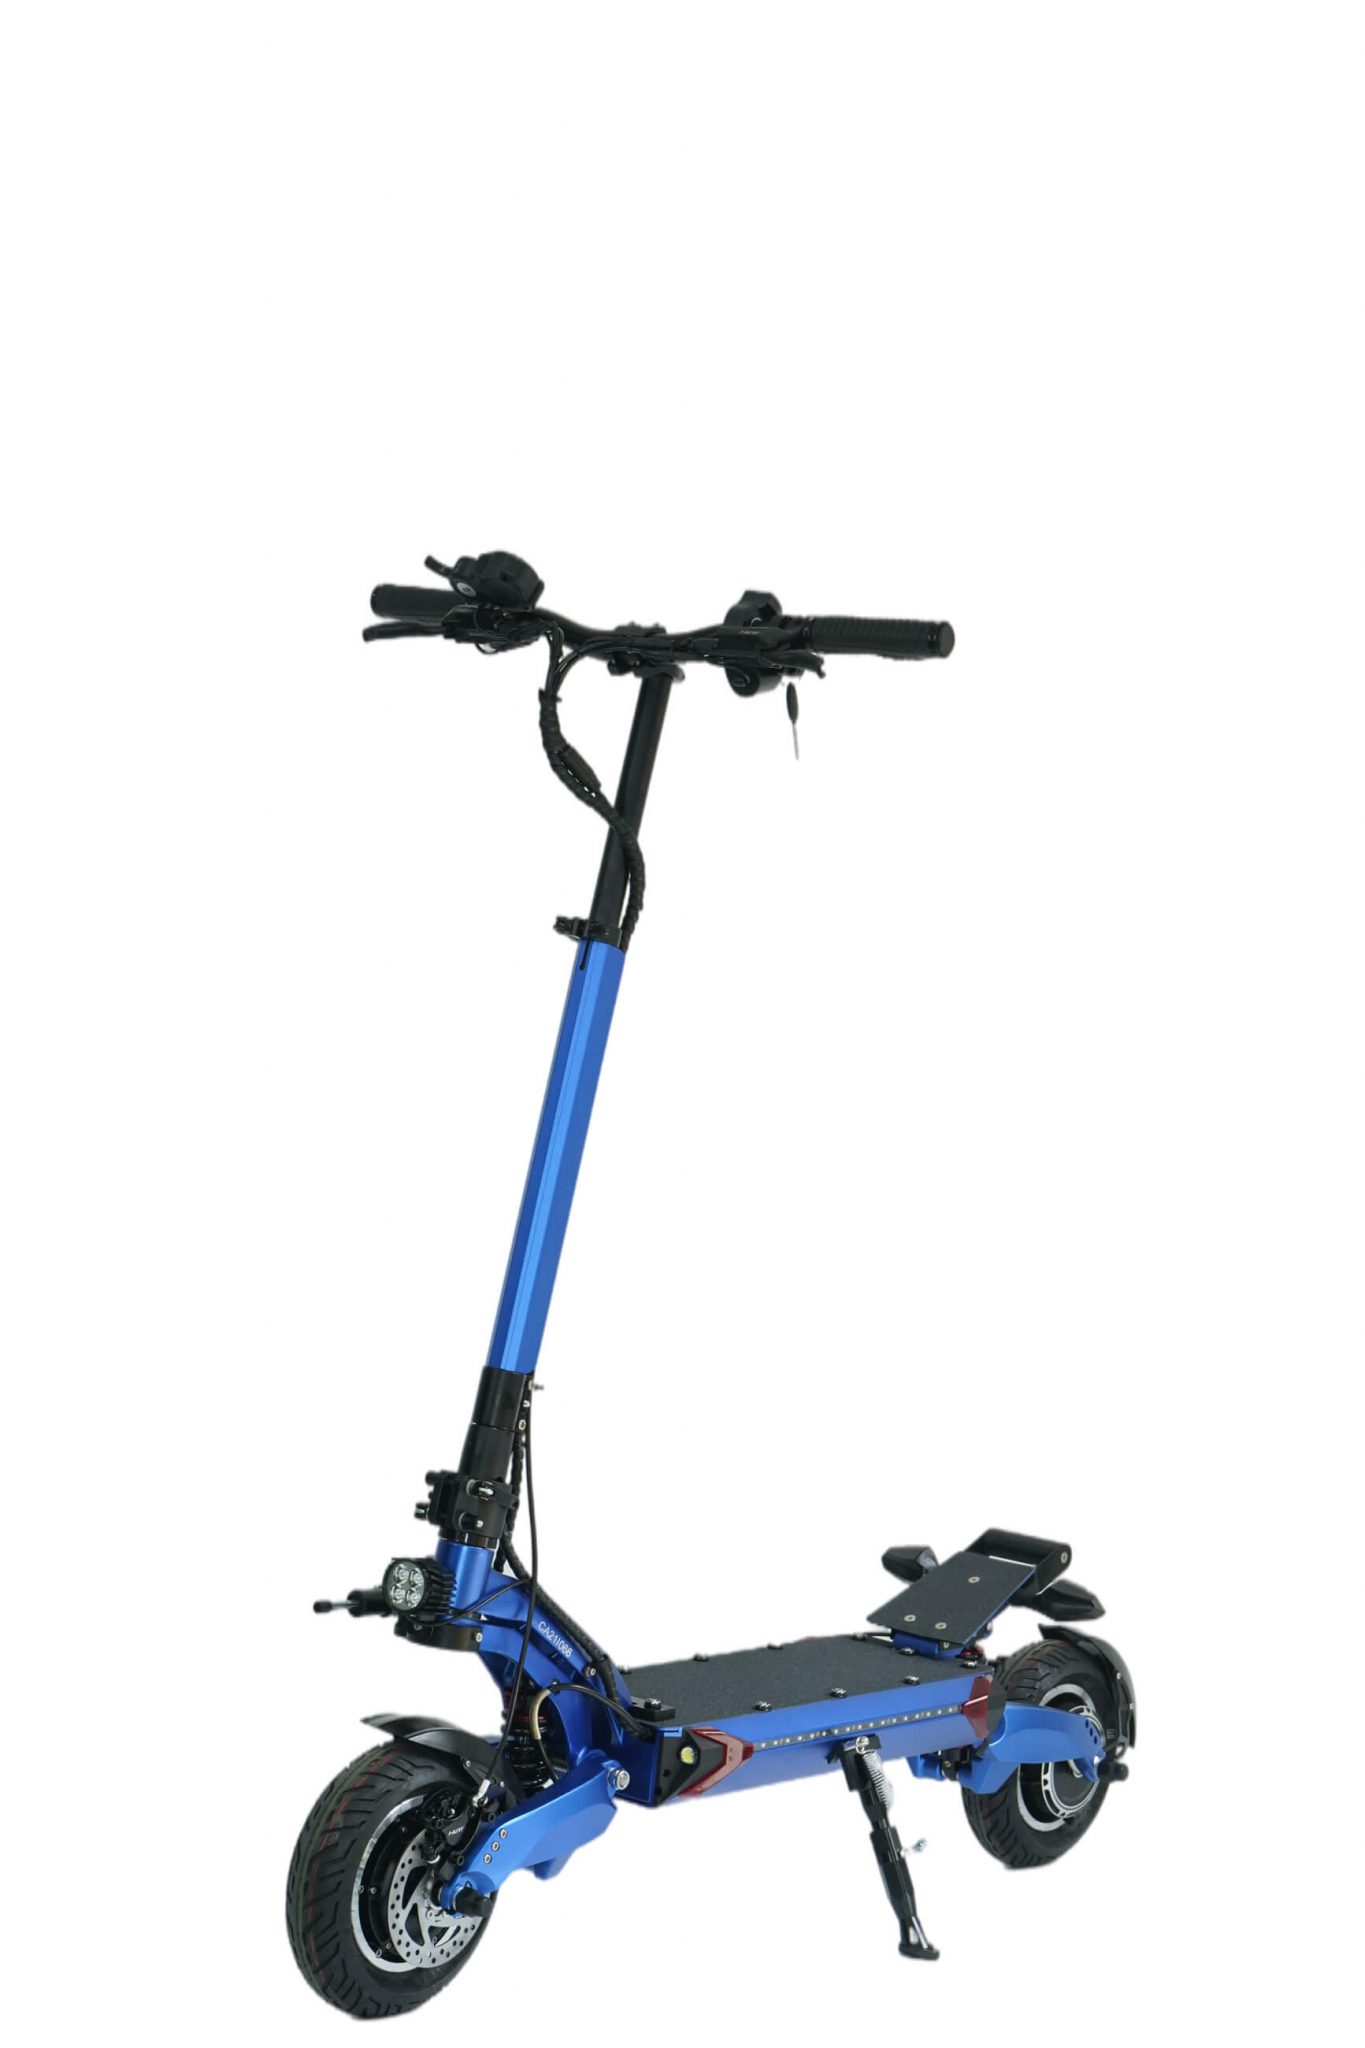 blade limited 10 inch 60V electric scooter blue color 1